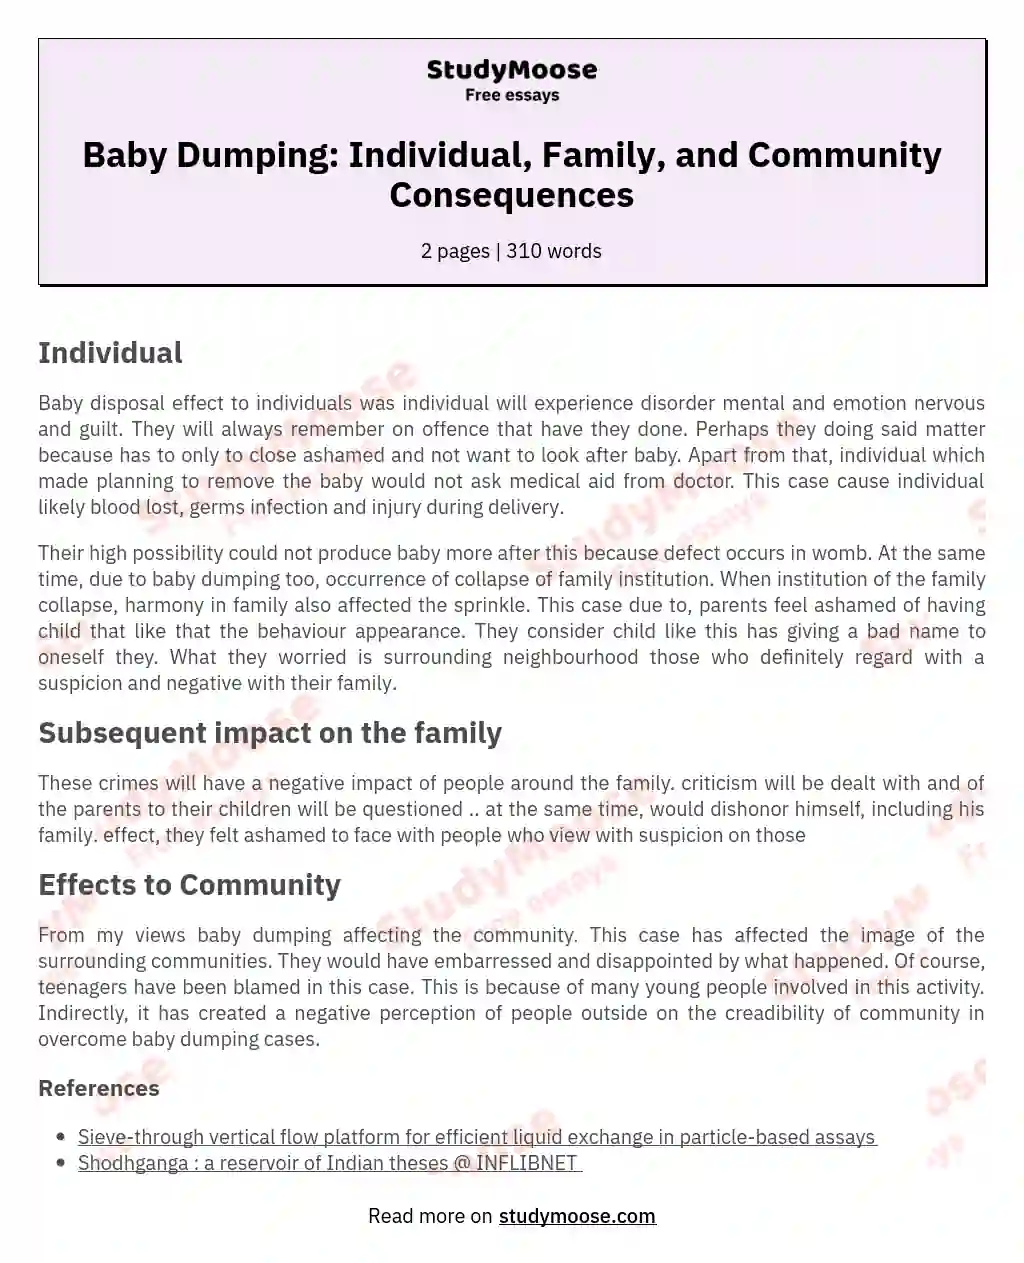 Baby Dumping: Individual, Family, and Community Consequences essay